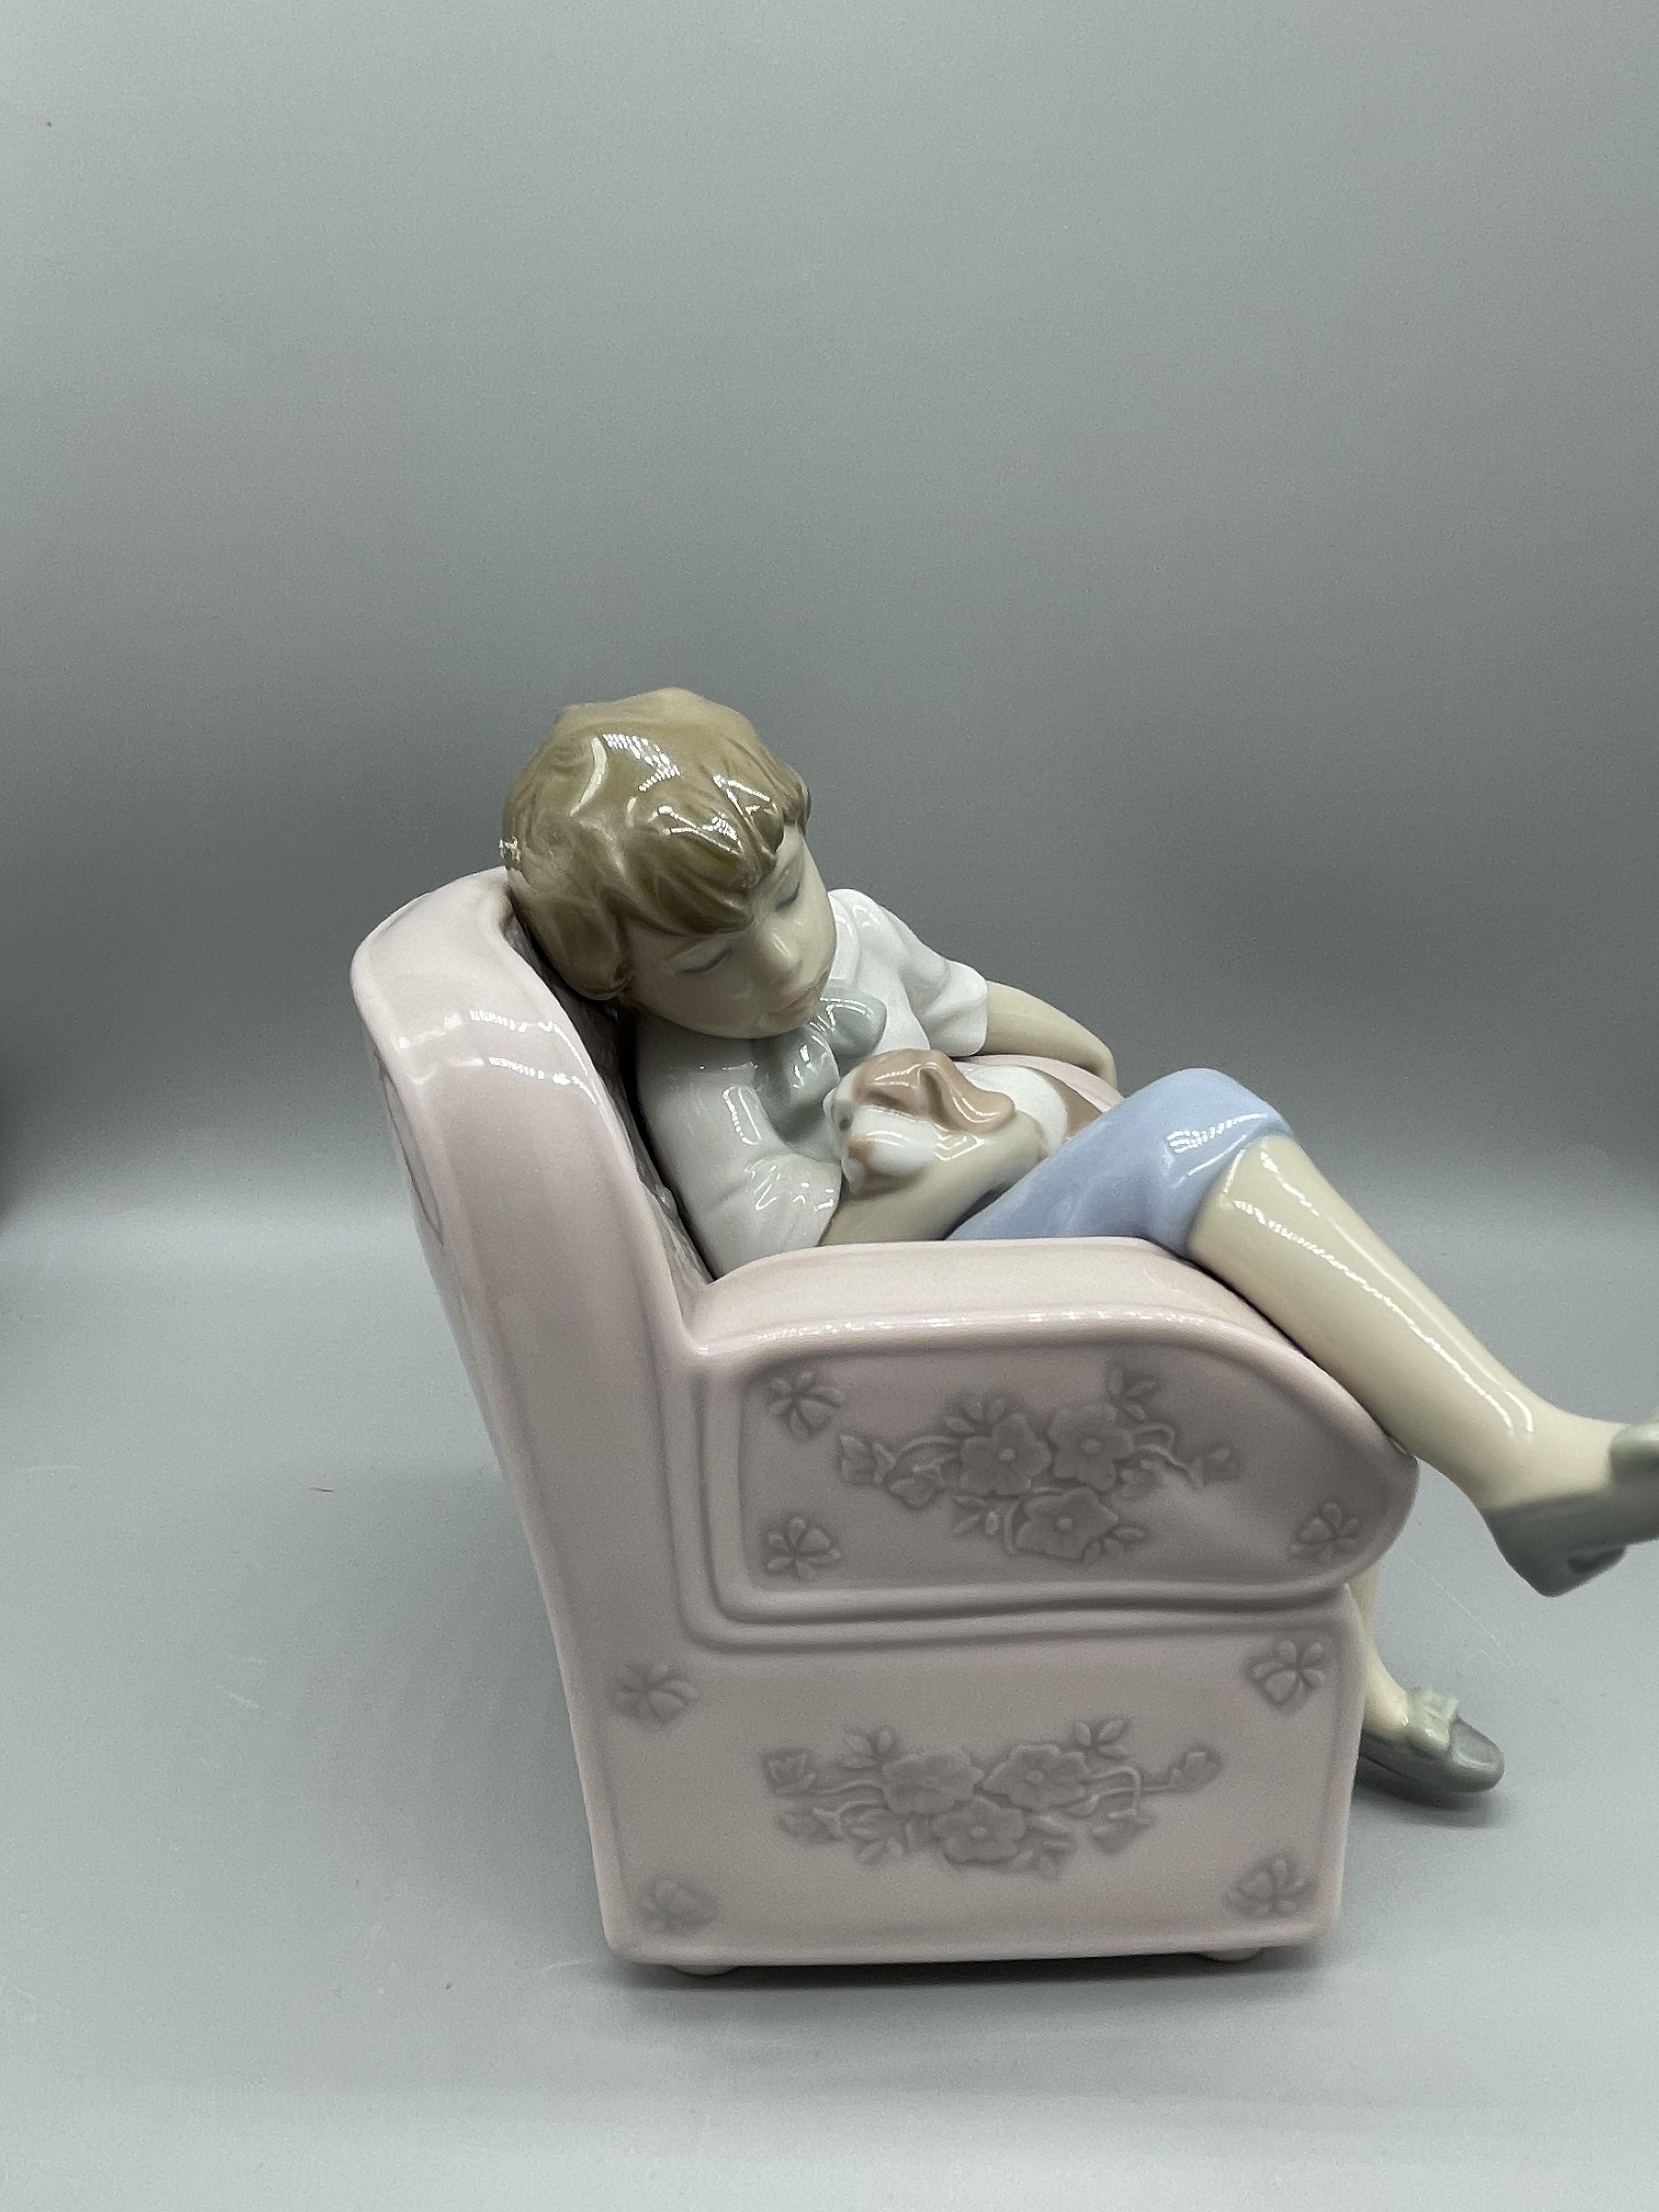 Lladro Boy in Chair with Pup - Image 5 of 8